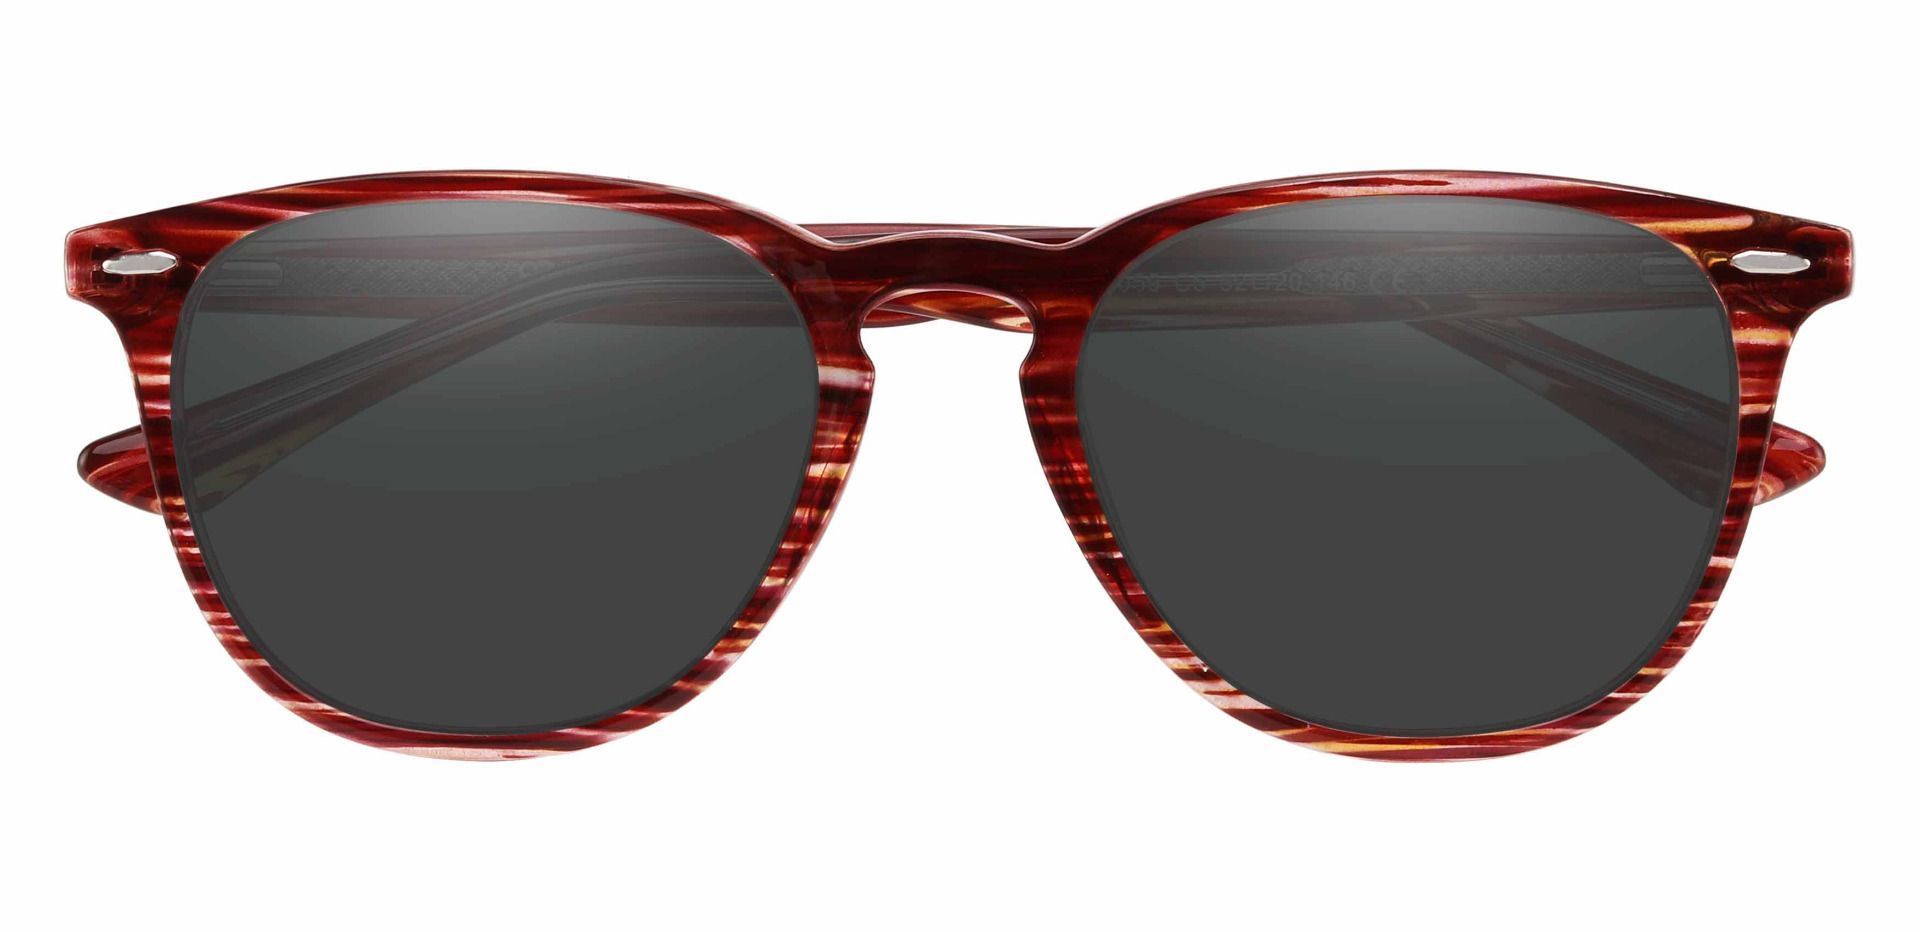 Sycamore Oval Progressive Sunglasses - Red Frame With Gray Lenses